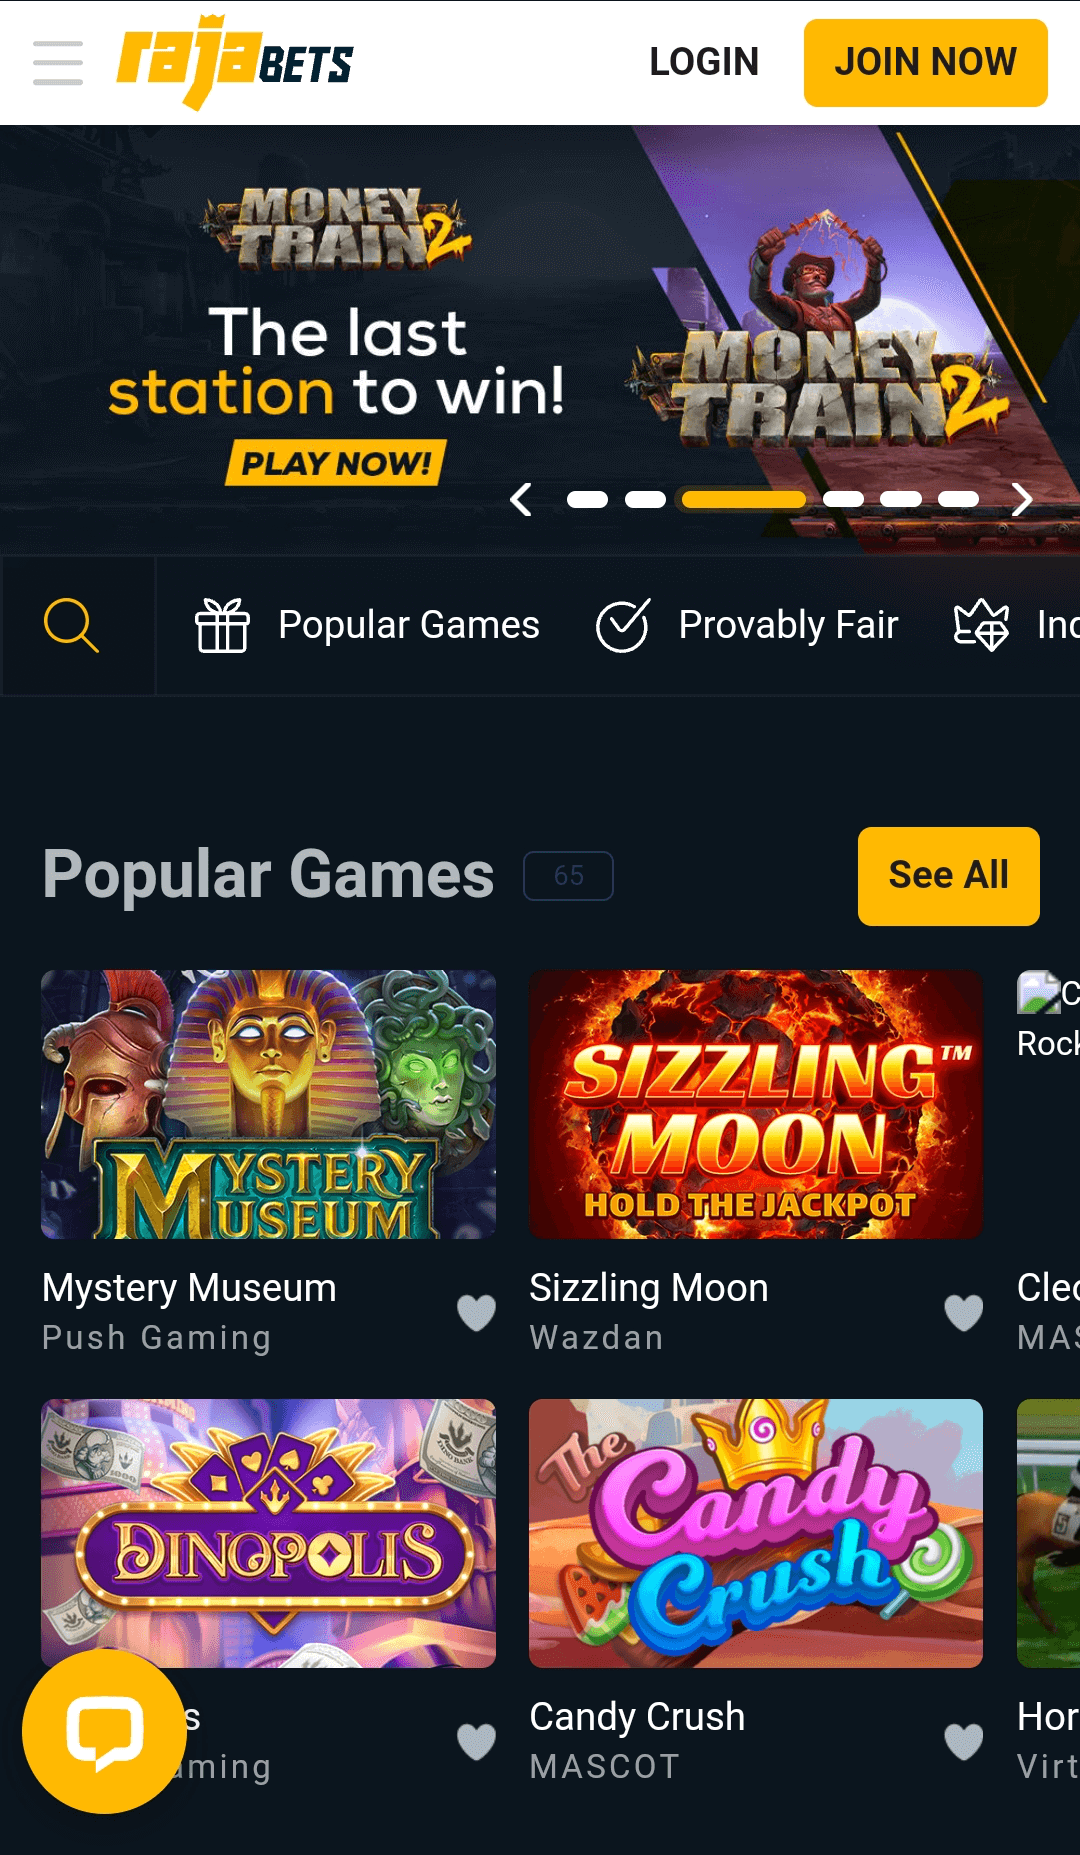 casino section in the rajabets app